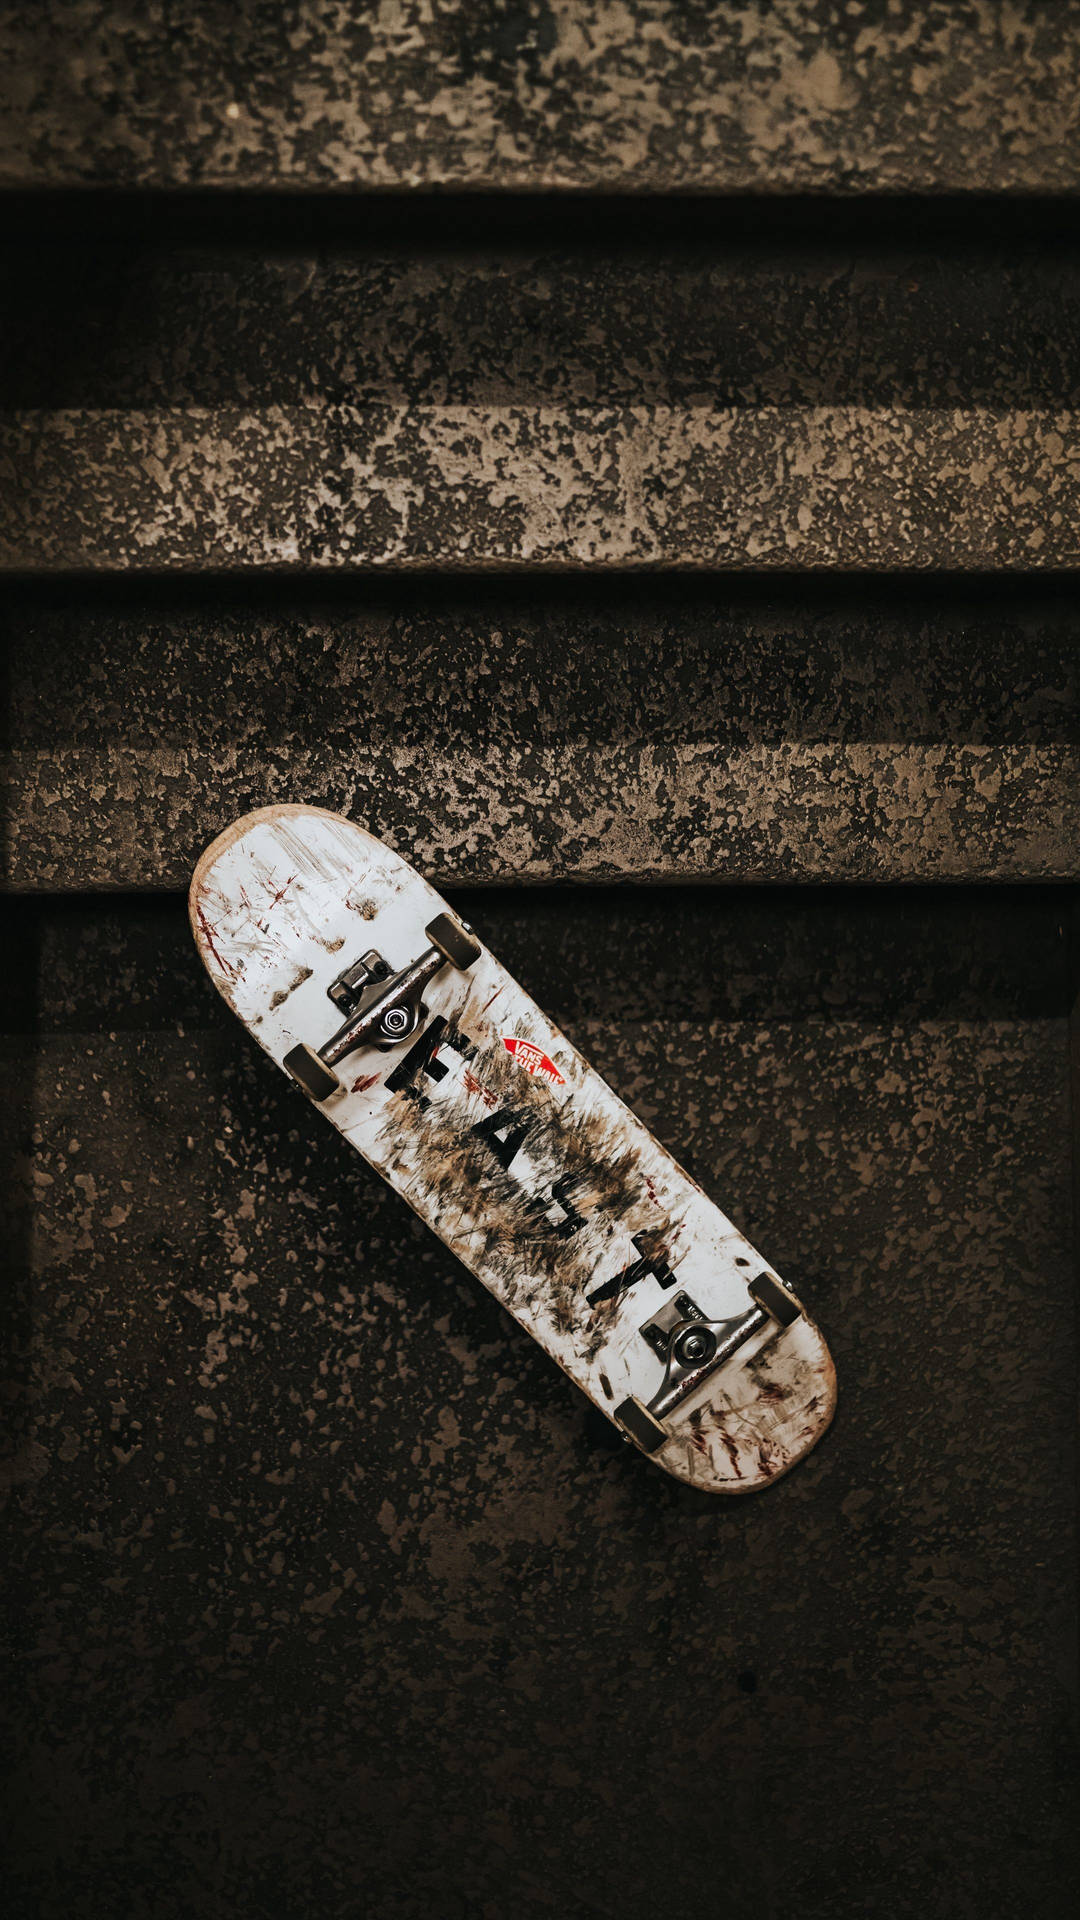 Concrete Stairs And Skateboard Iphone Wallpaper